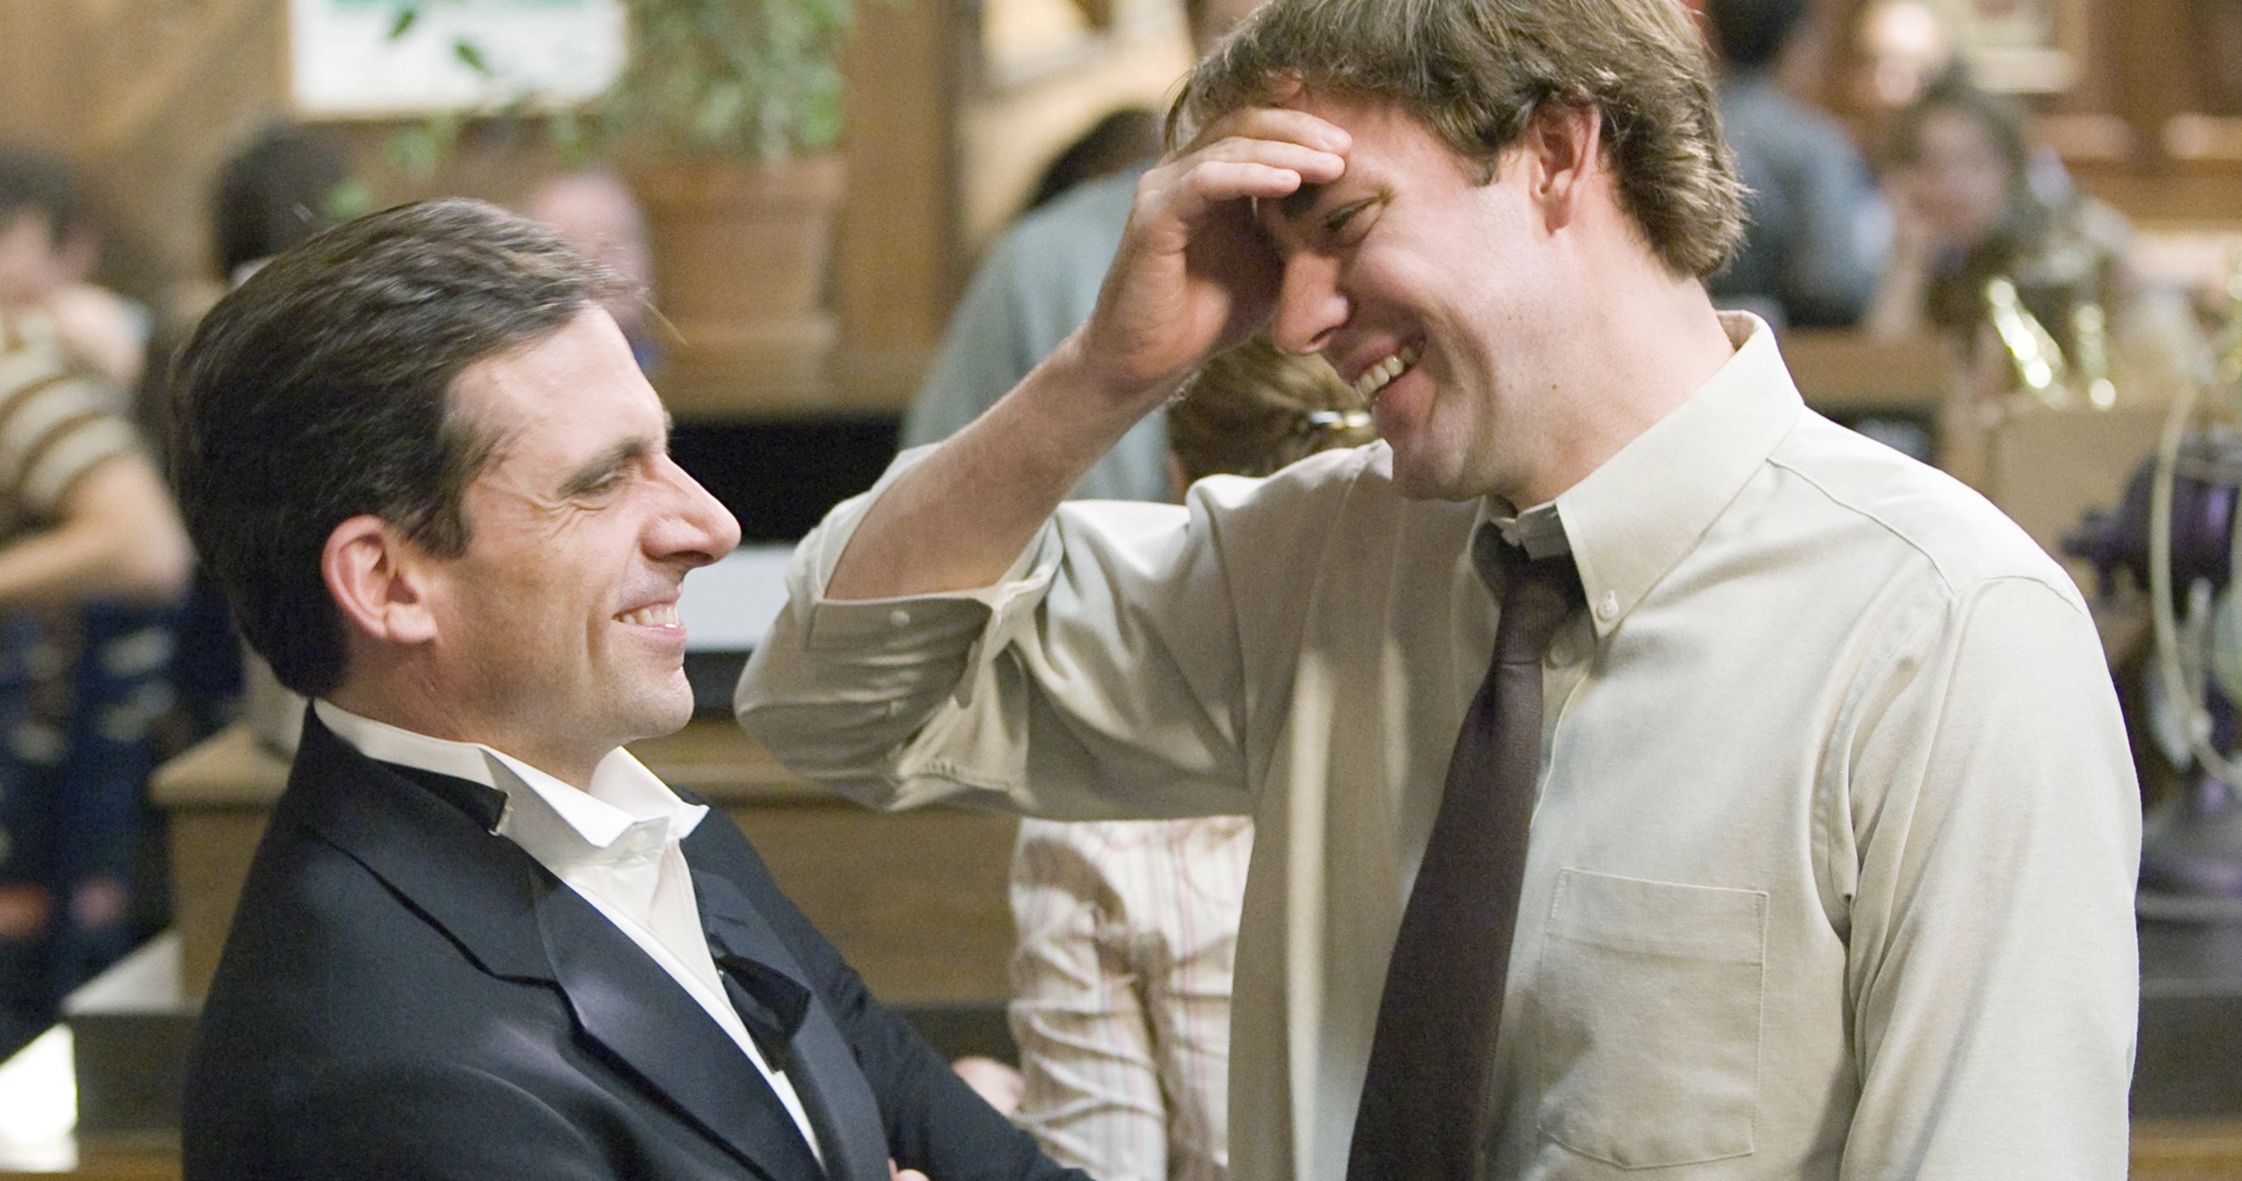 The Office Revival May Be Set in Original Timeline with Newly Shot Lost Episodes